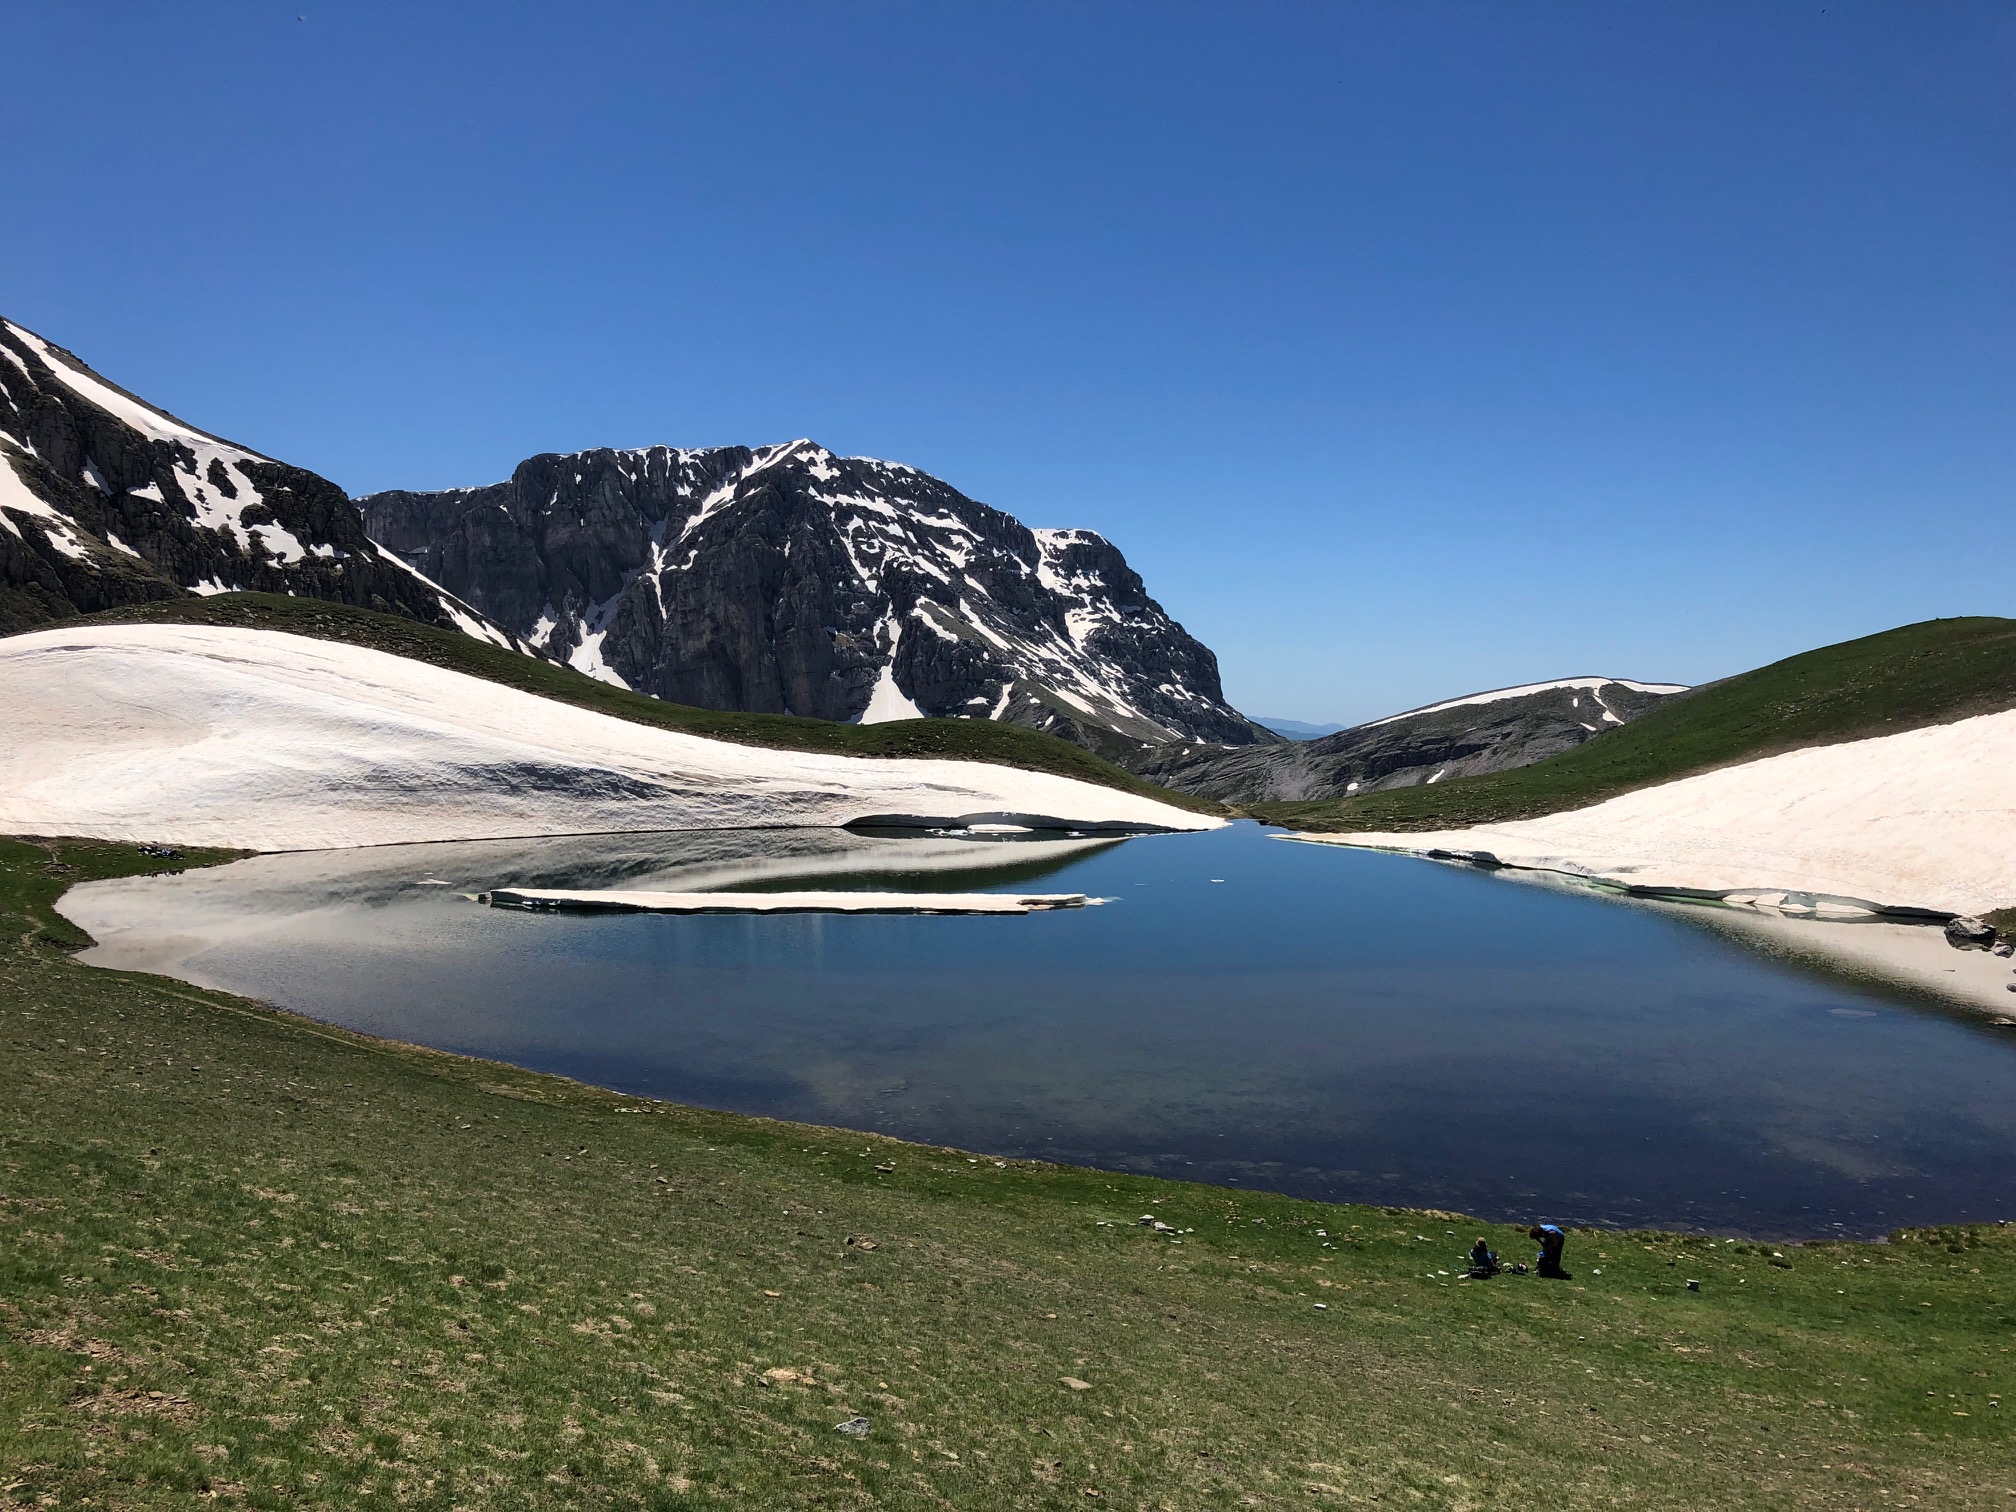 The Dragon Lake of Mt Tymfi is a highlight of the alpine landscape of Zagori